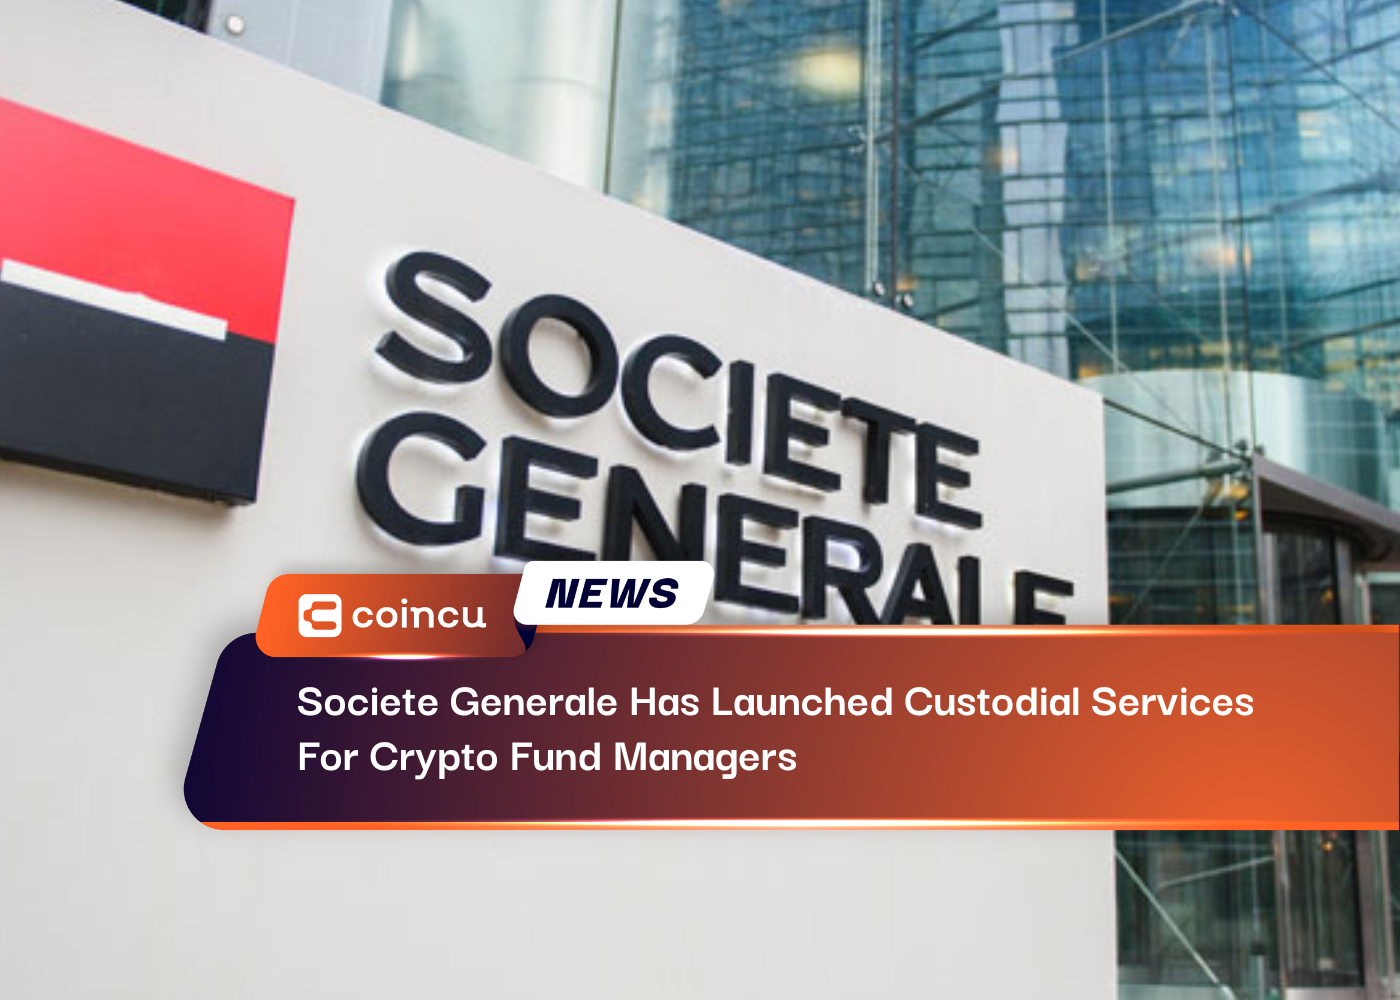 Societe Generale Has Launched Custodial Services